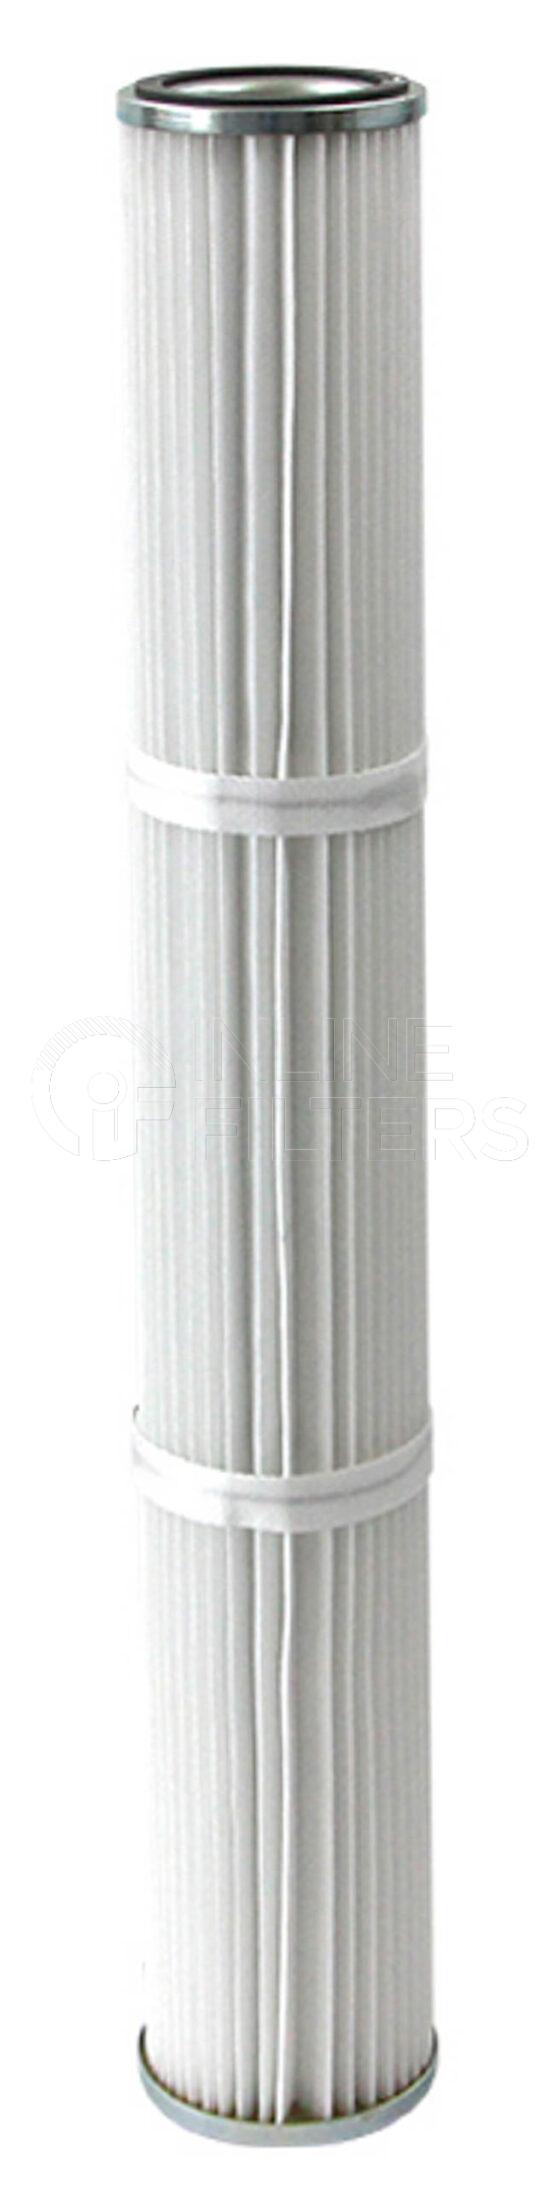 Inline FA17016. Air Filter Product – Cartridge – Round Product Air filter product